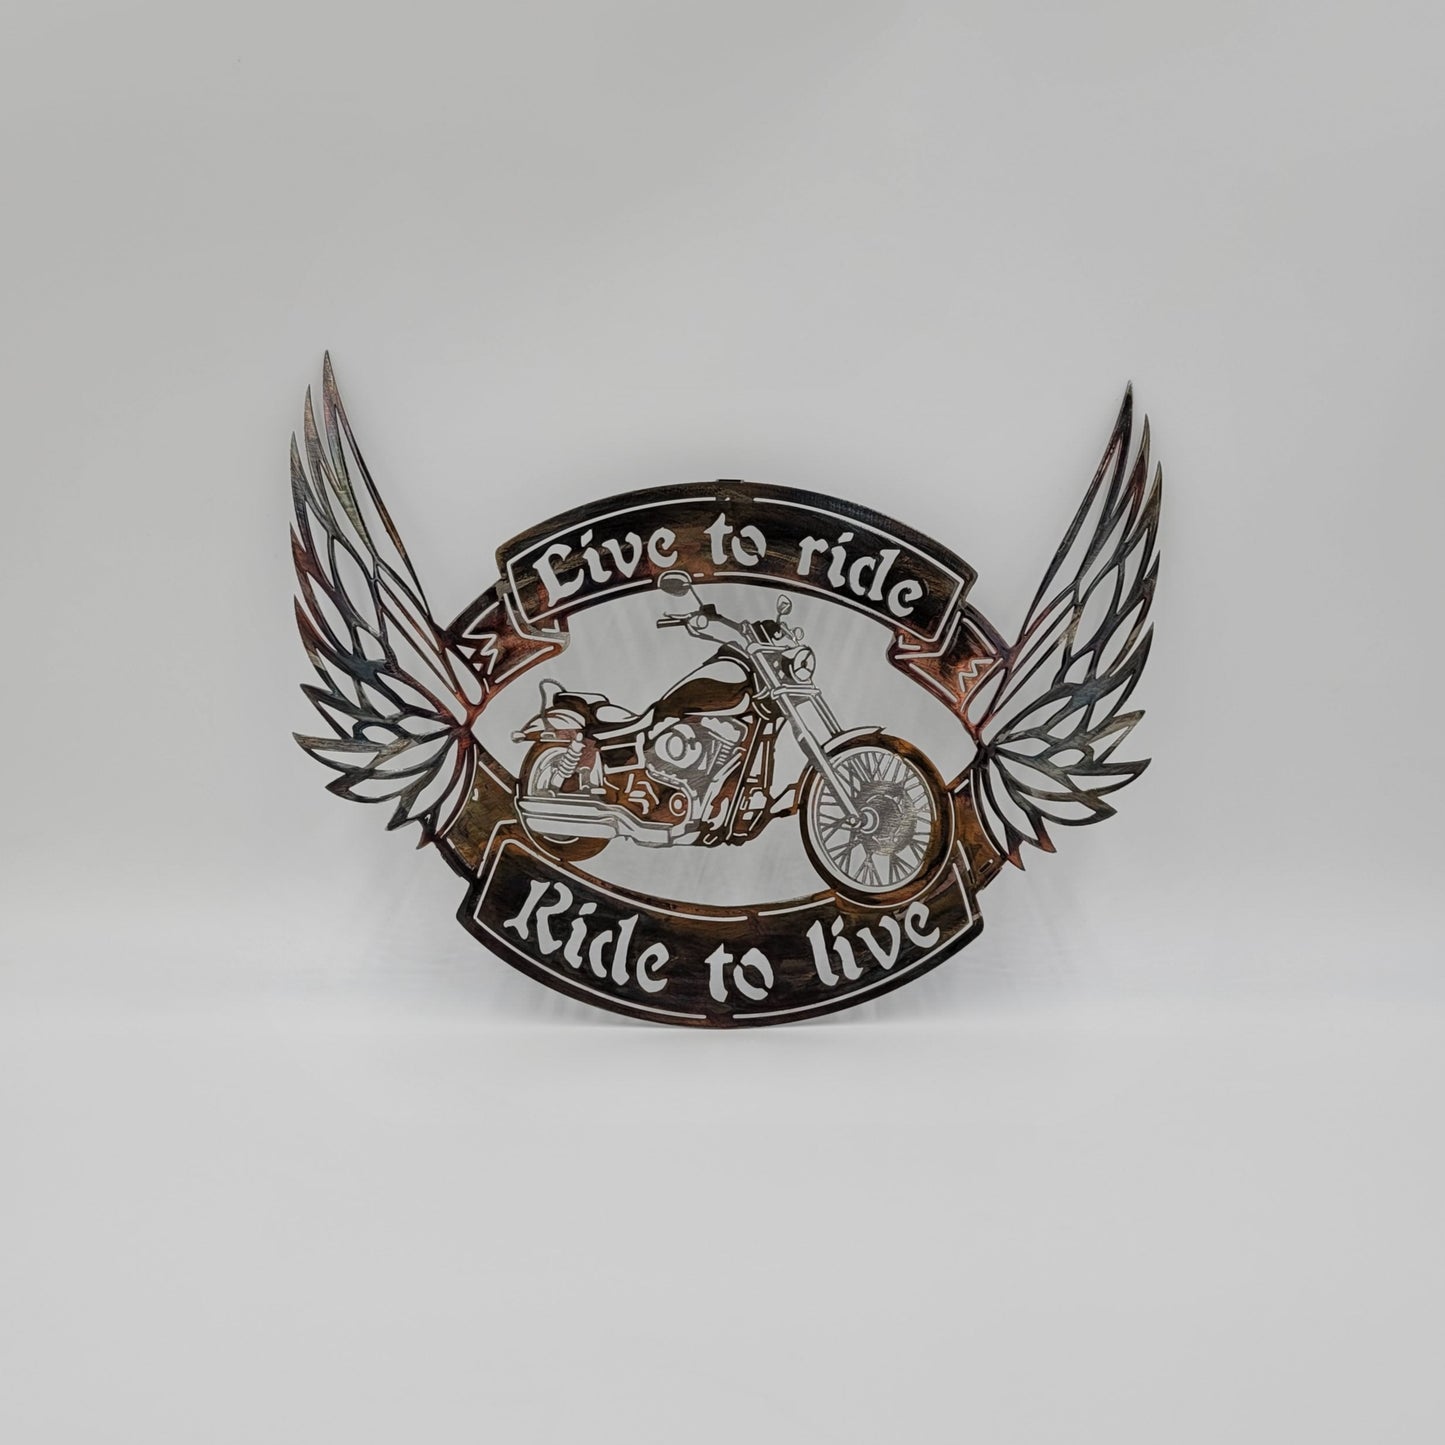 Live To Ride, Ride To Live Motorcycle Wall Hanging. Made from 18-Gauge Sheet Metal. Measures 11 1/2" High x 15 1/2" W x 18 gauge Thick. Four color options available; Colored-Rustic, Black, Hammer Tone, Bare Metal. Sprayed with a thick layer of Varathane. 